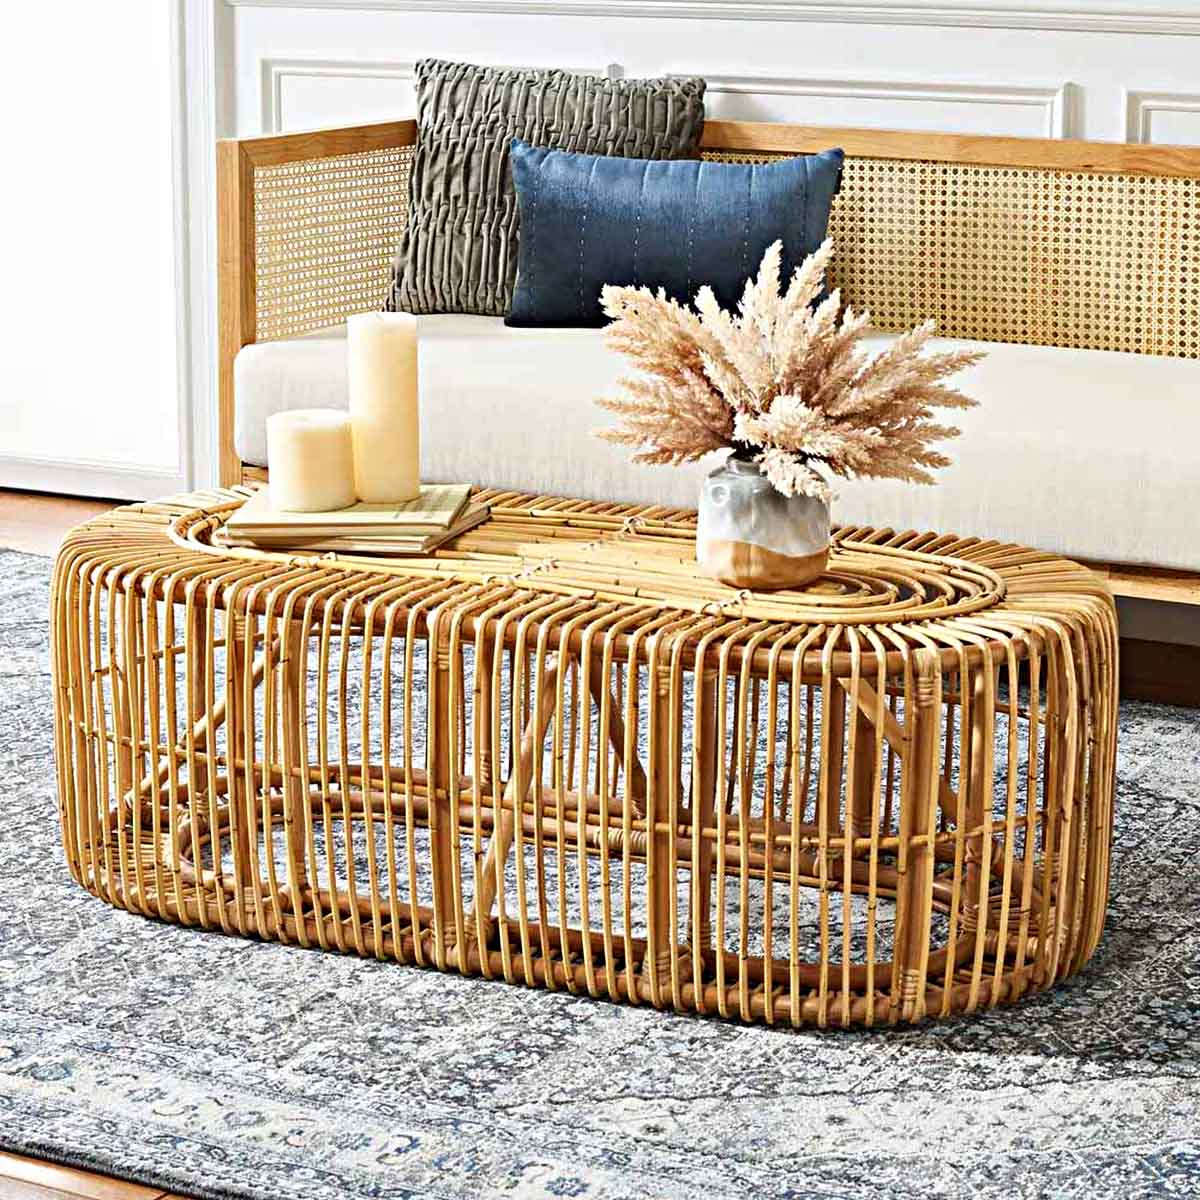 How To Decorate An Oval Coffee Table